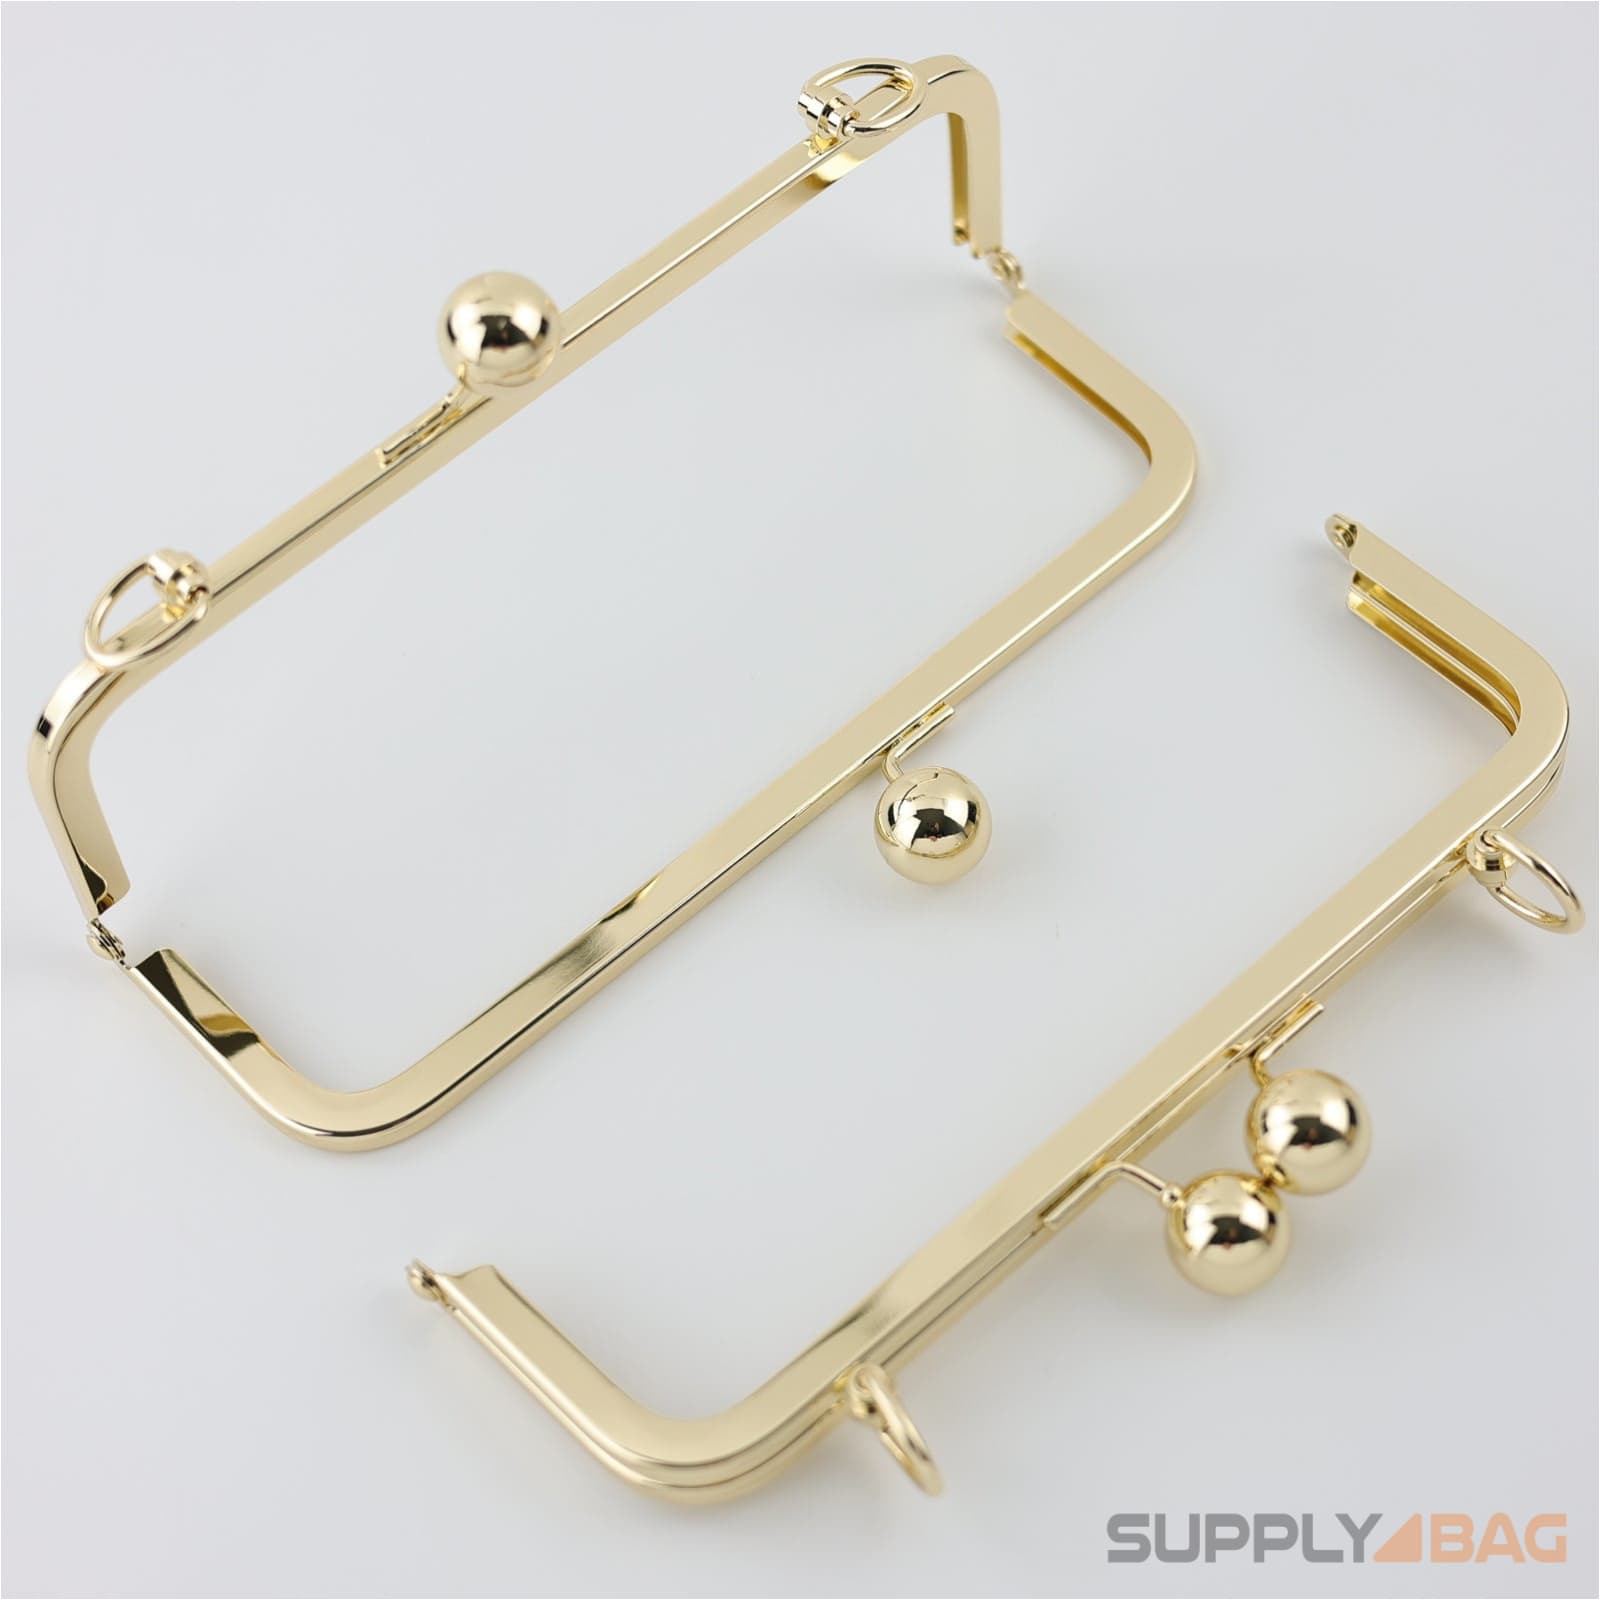 8 x 2.5 inch - Kisslock Shiny Gold Metal Purse Frame with D Rings